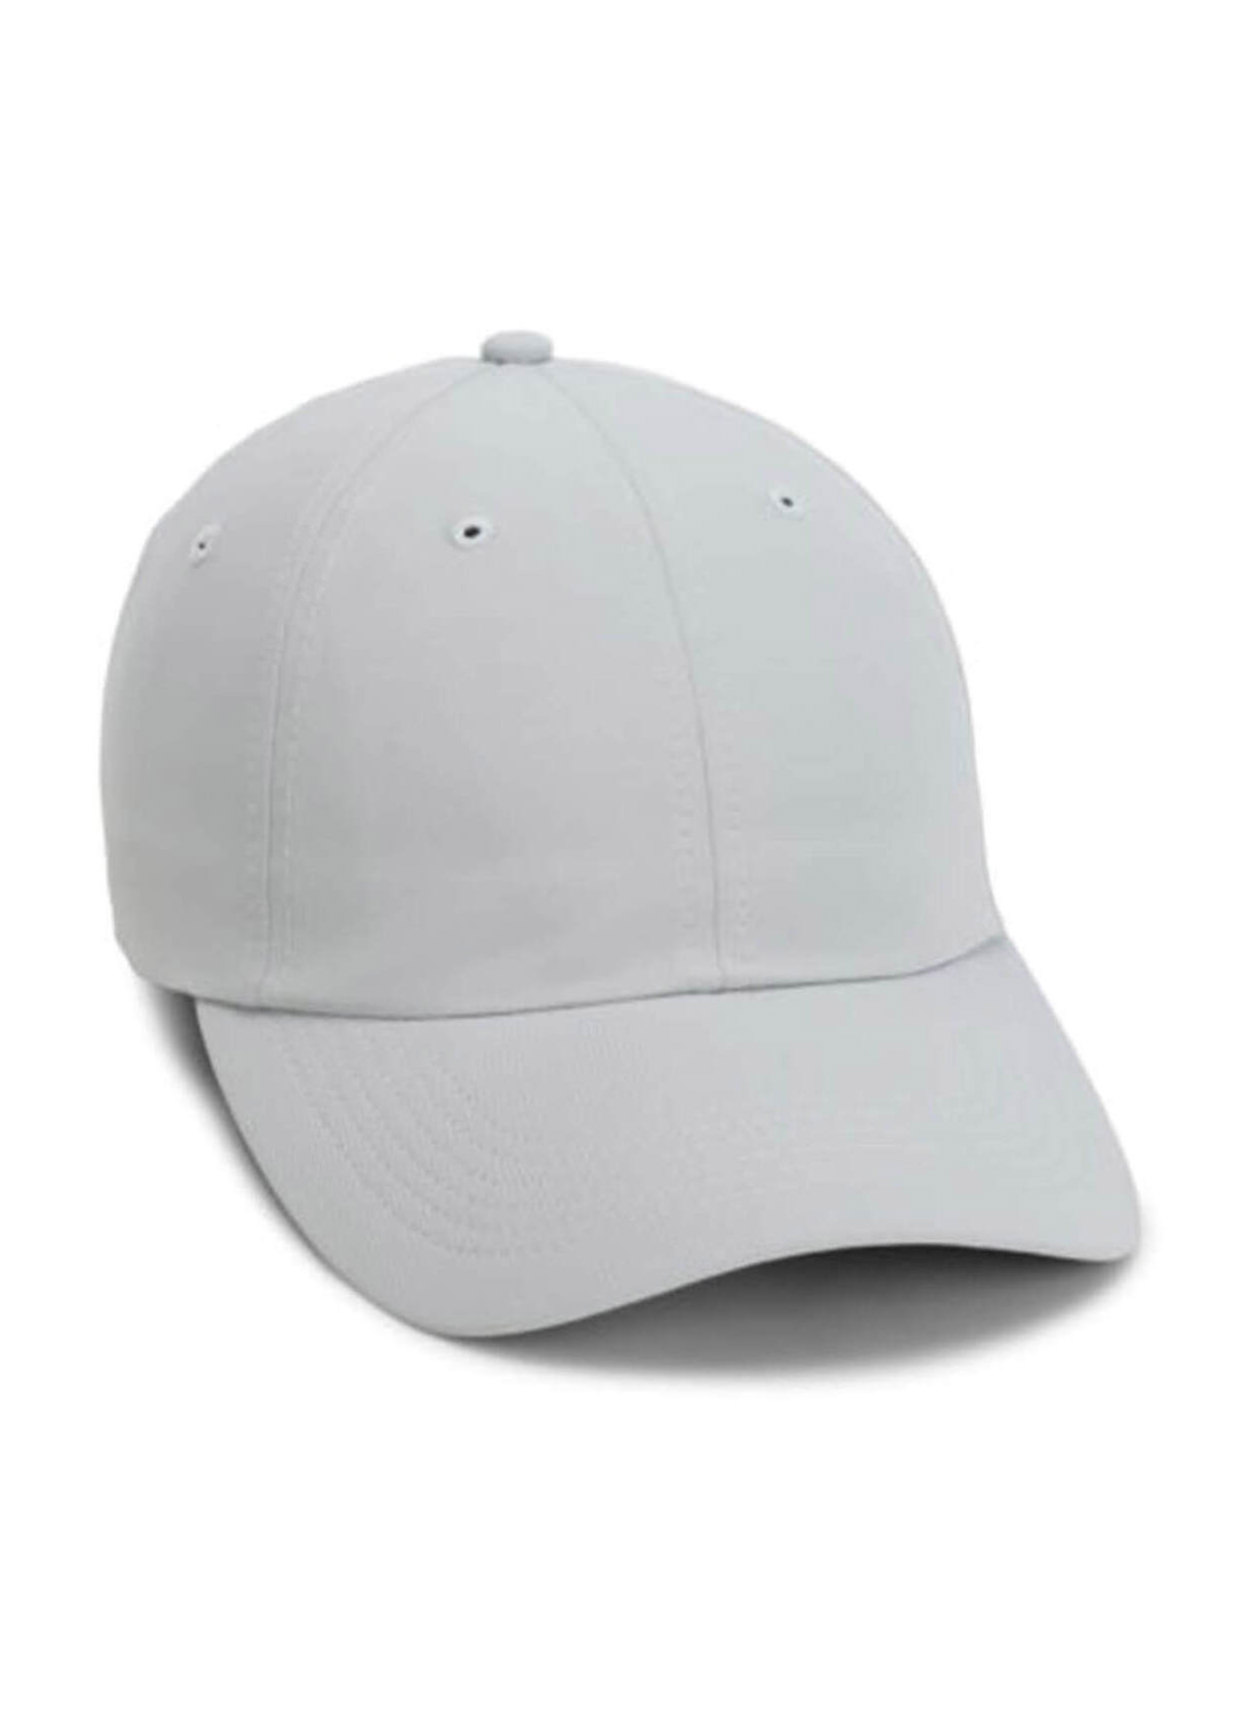 Imperial Fog Original Small Fit Performance Hat